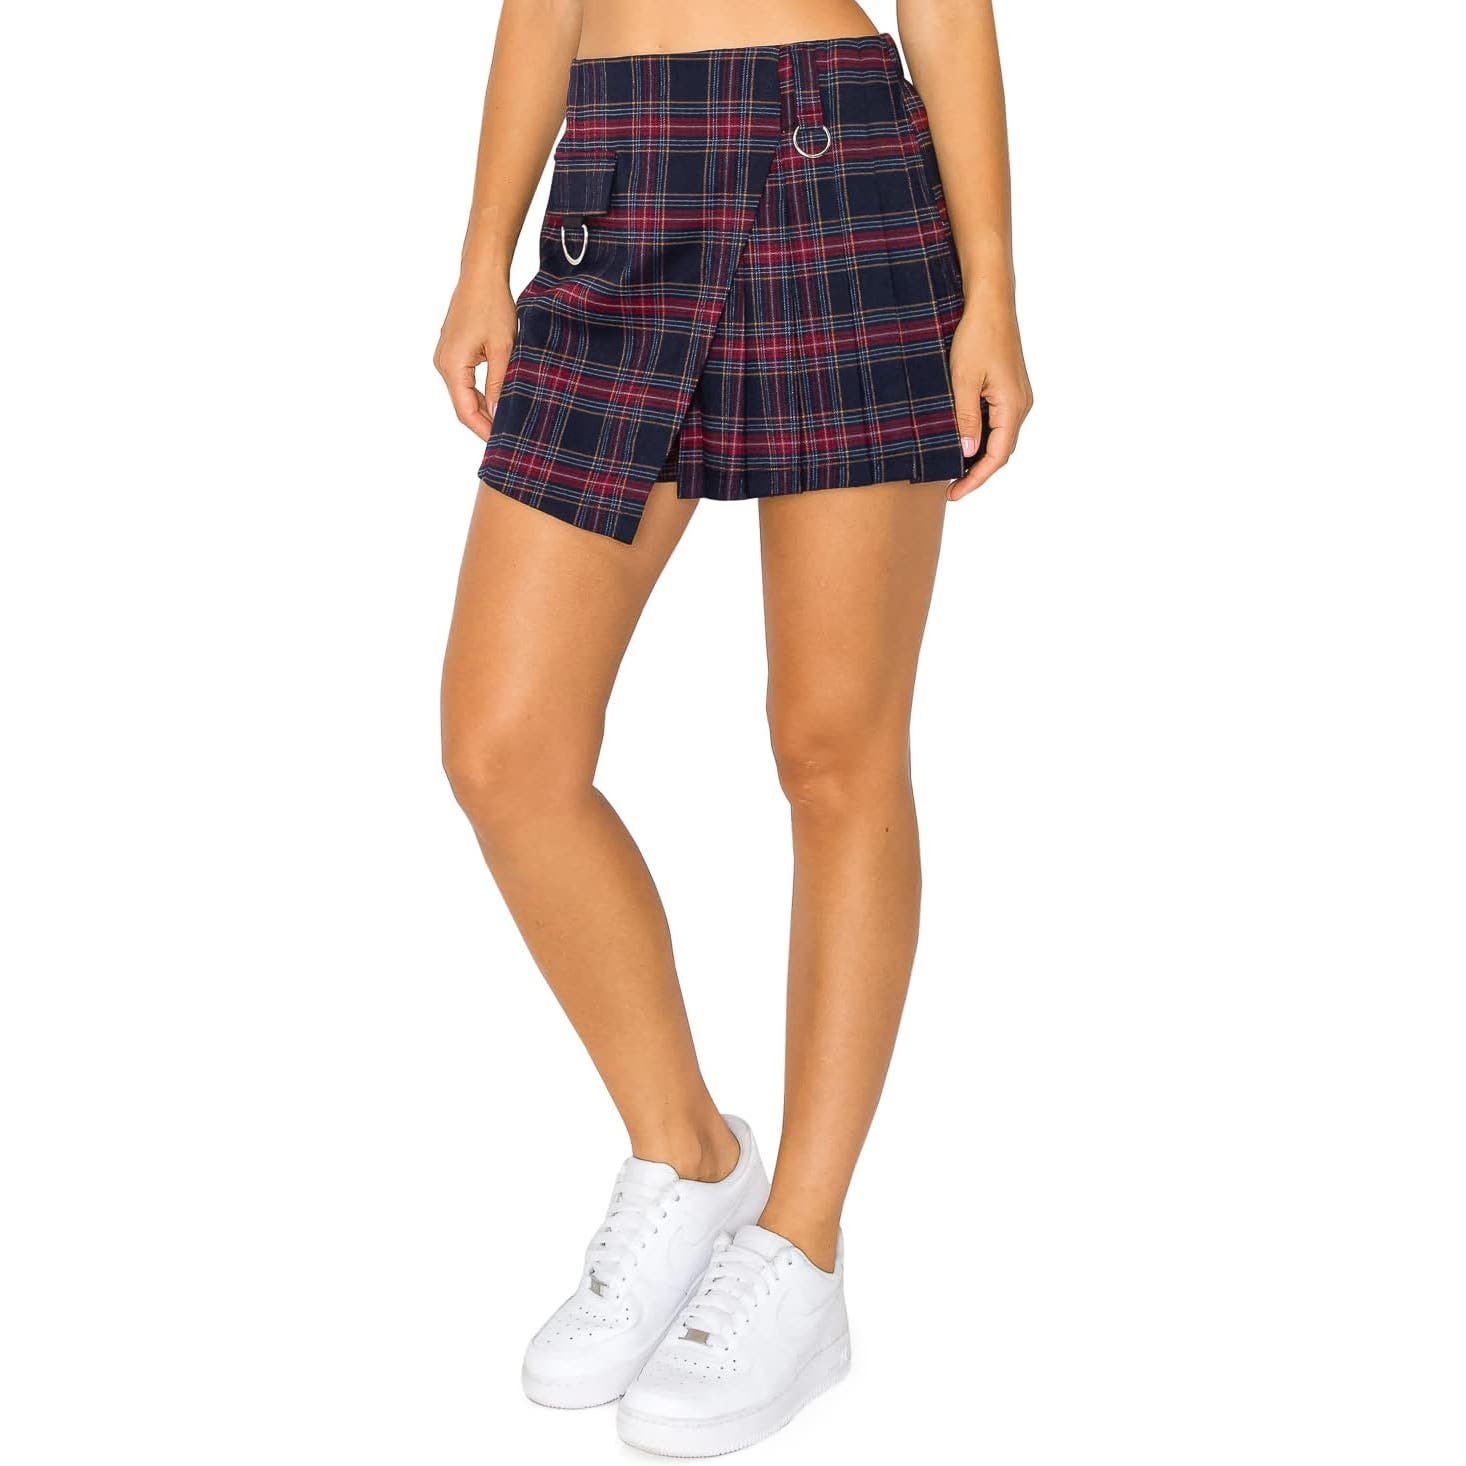 save up to 70% Cali1850 Tartan Plaid Skort Skirt Small Blue Red Pleated Wrap Academia Preppy Hyi3YvFMn all for you